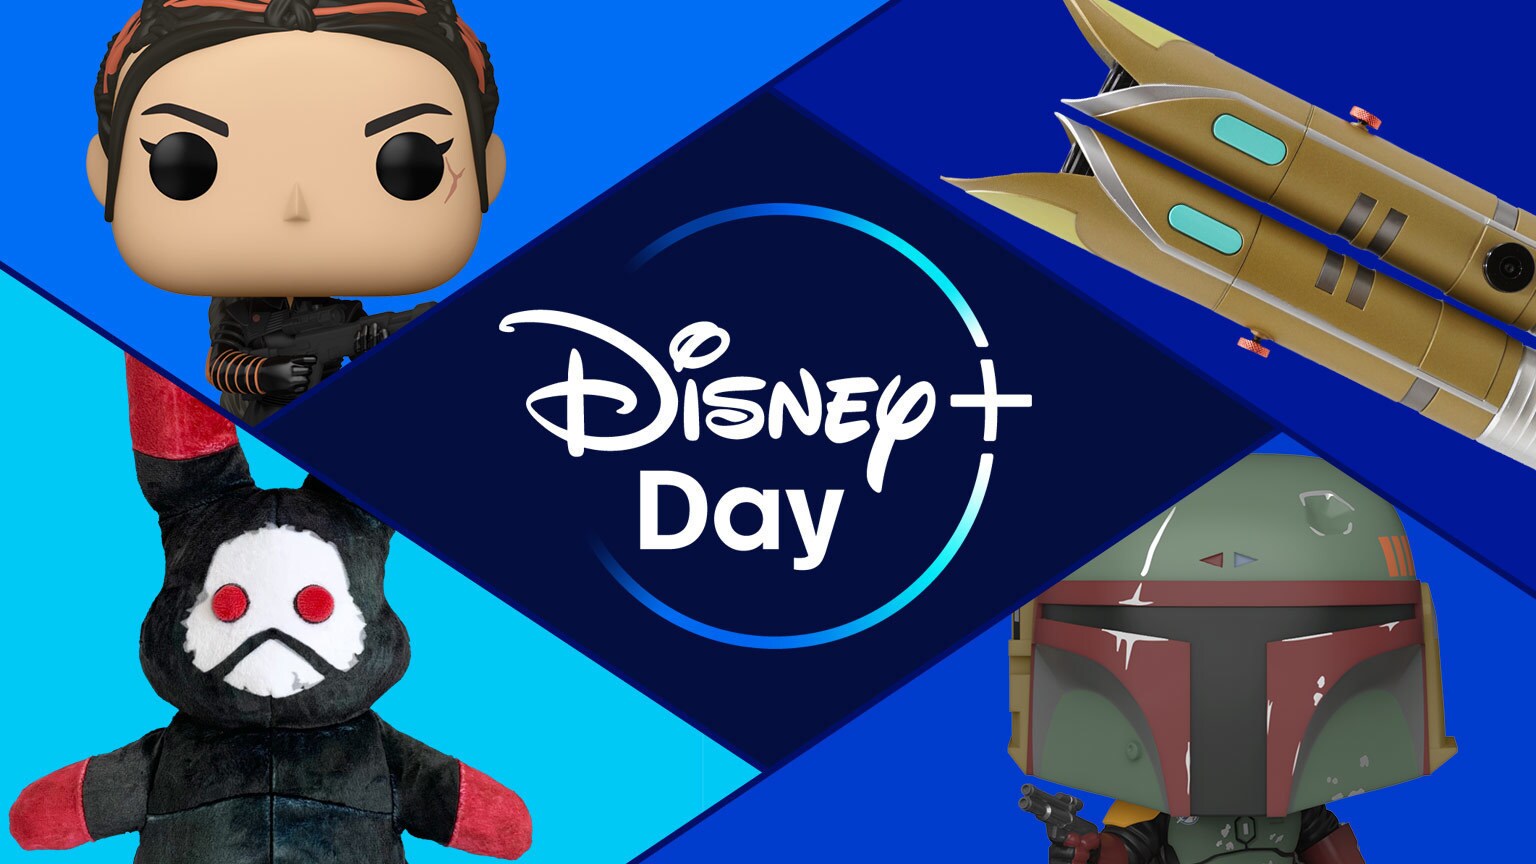 Disney+ Day: Star Wars Deals, Activities, and Product Reveals!